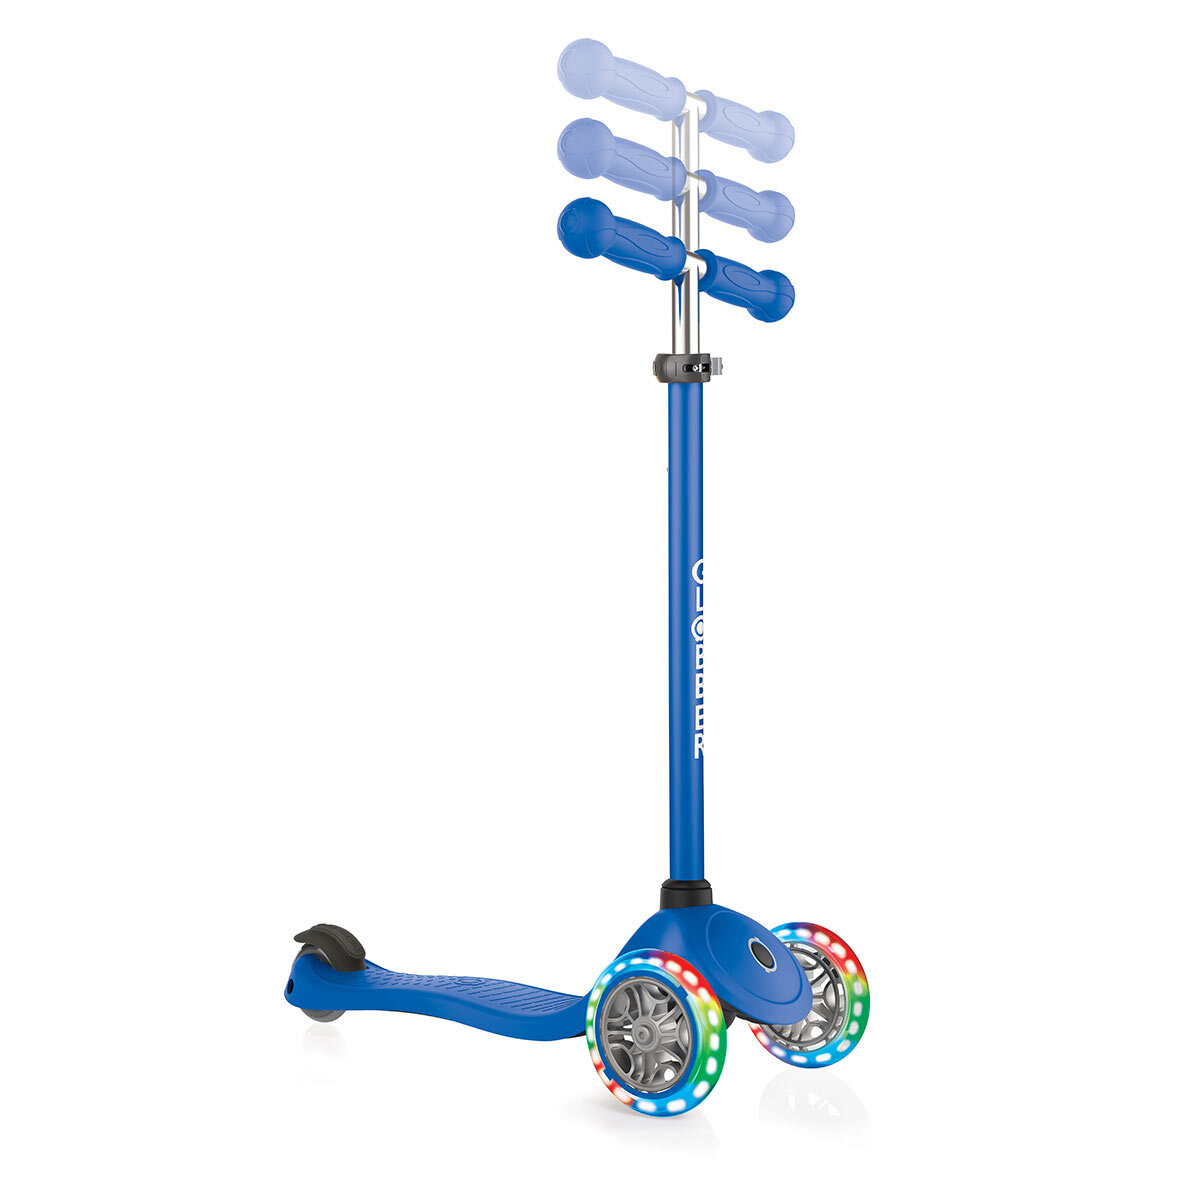 Buy Globber Primo Lights Scooter in Blue 4 Image at Costco.co.uk